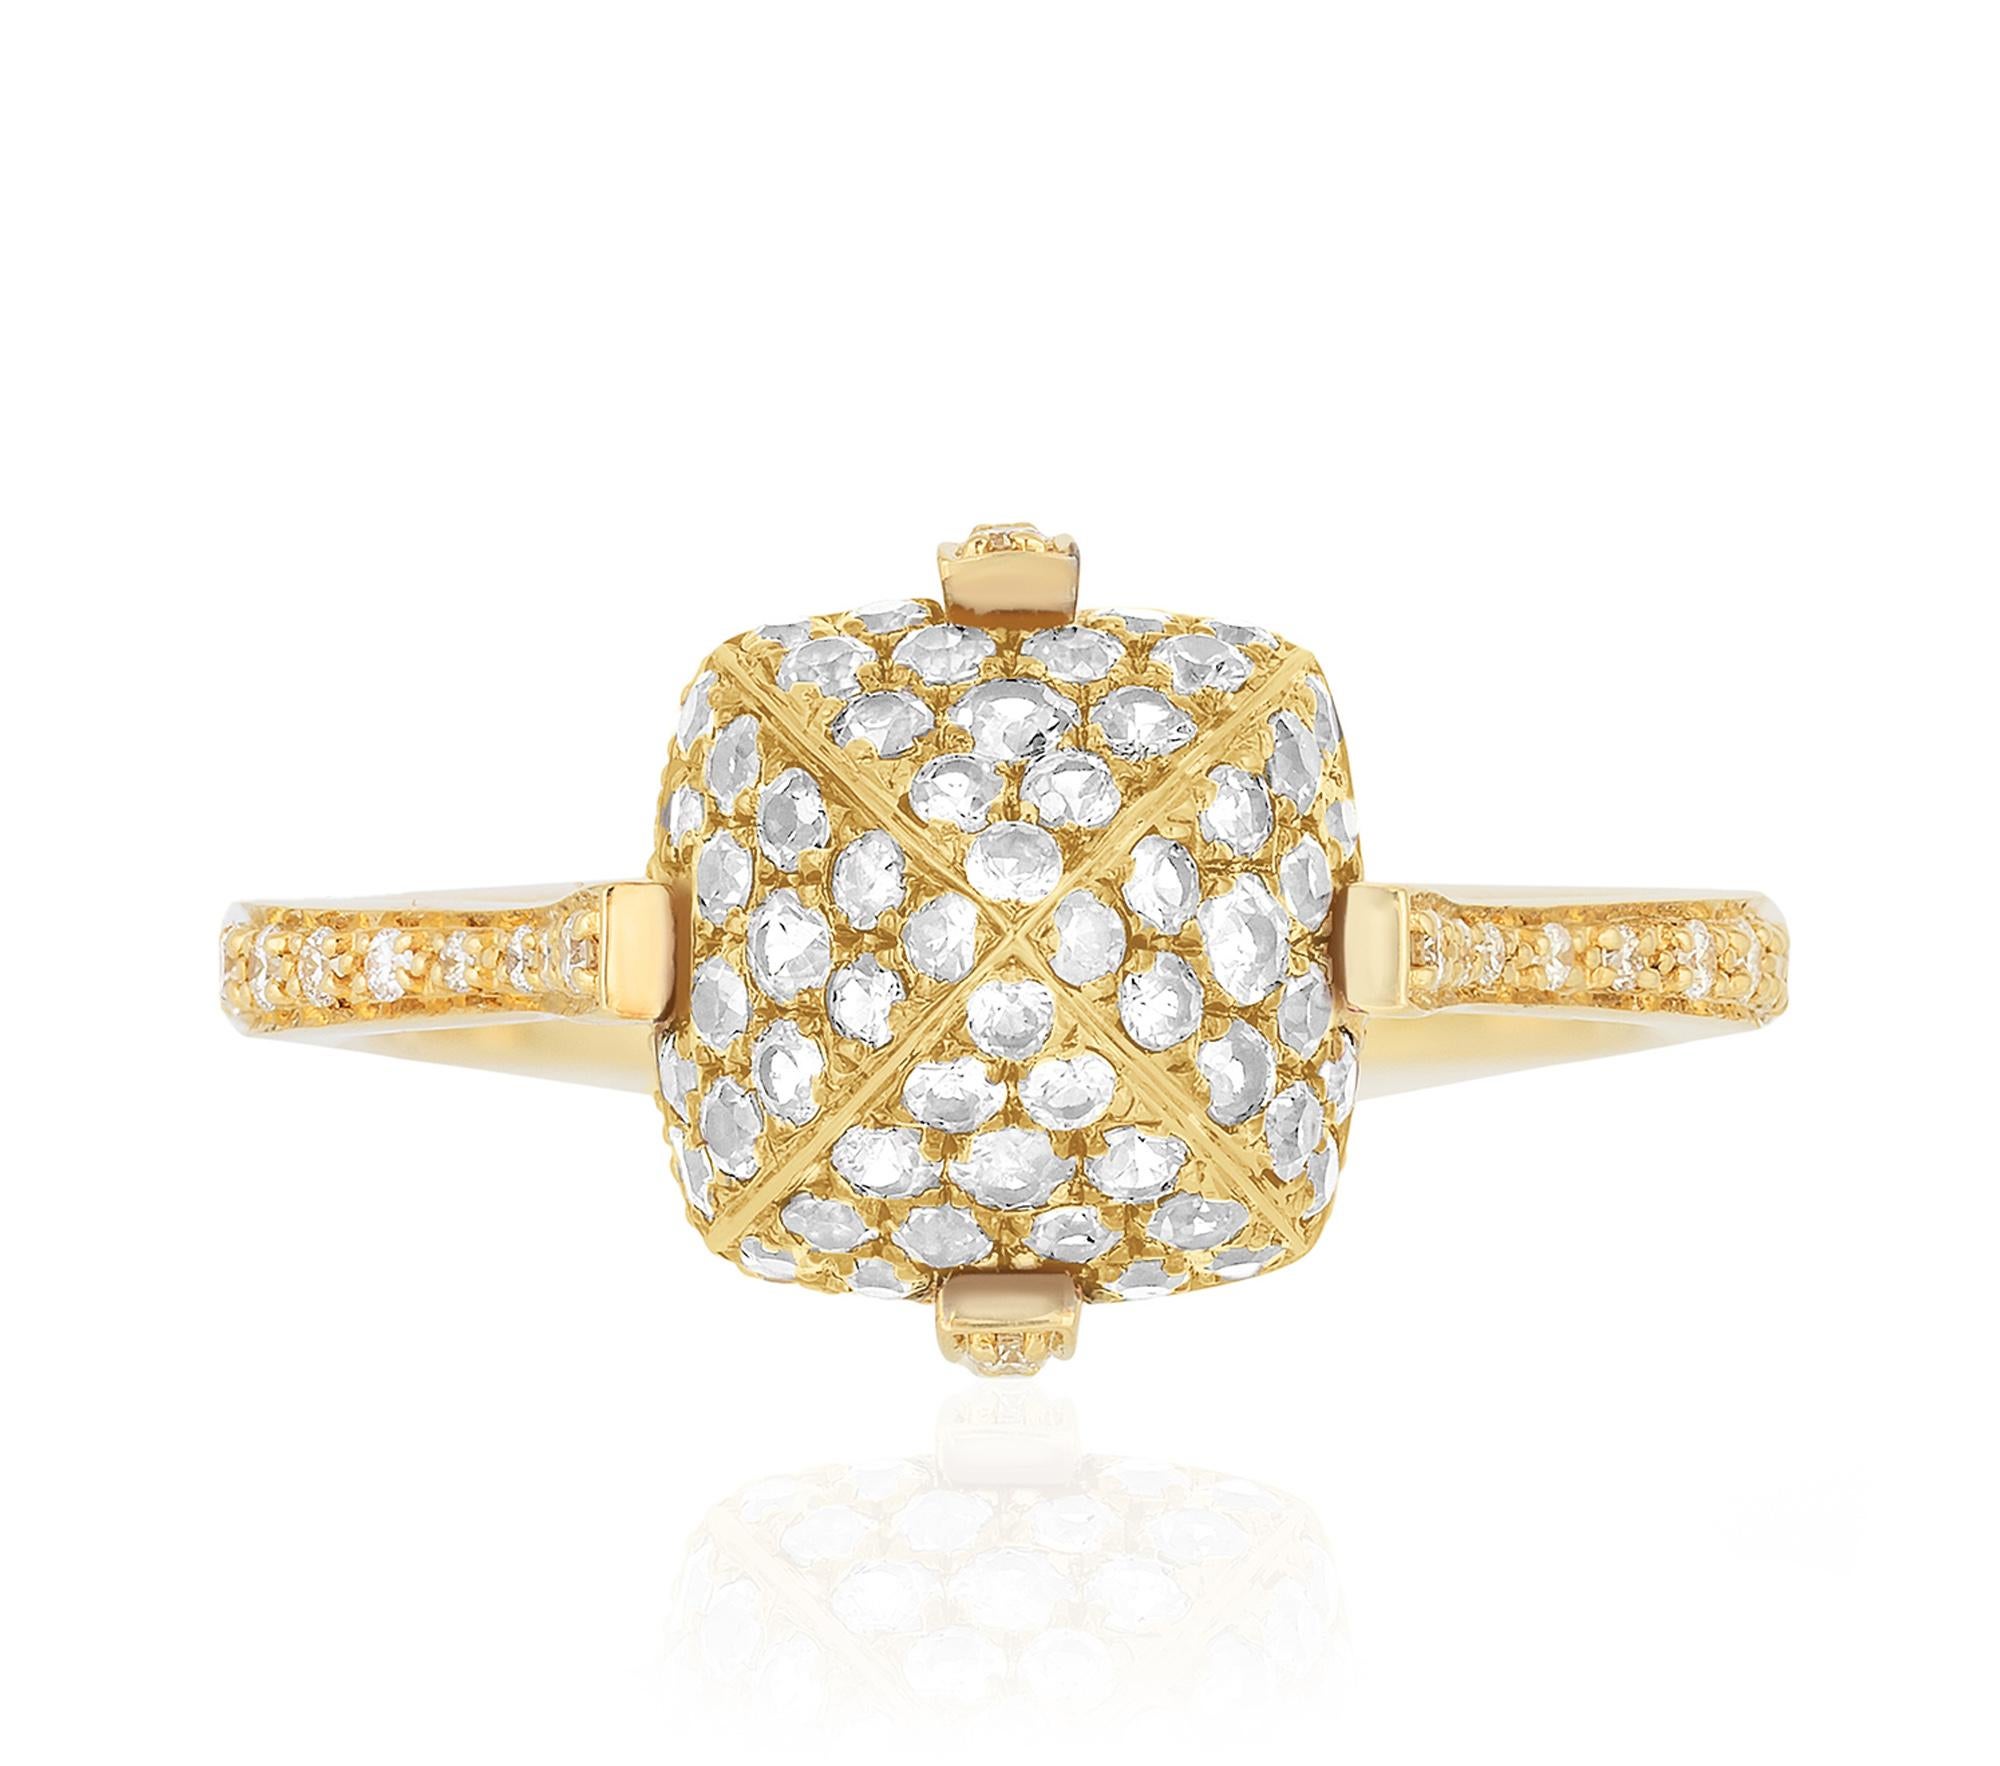 The Diamond & Gold Sugarloaf Pave Ring is an exquisite piece of jewelry crafted in luxurious 18K Yellow Gold. This striking ring features a captivating design with dazzling diamonds, creating a perfect balance of elegance and opulence. A timeless